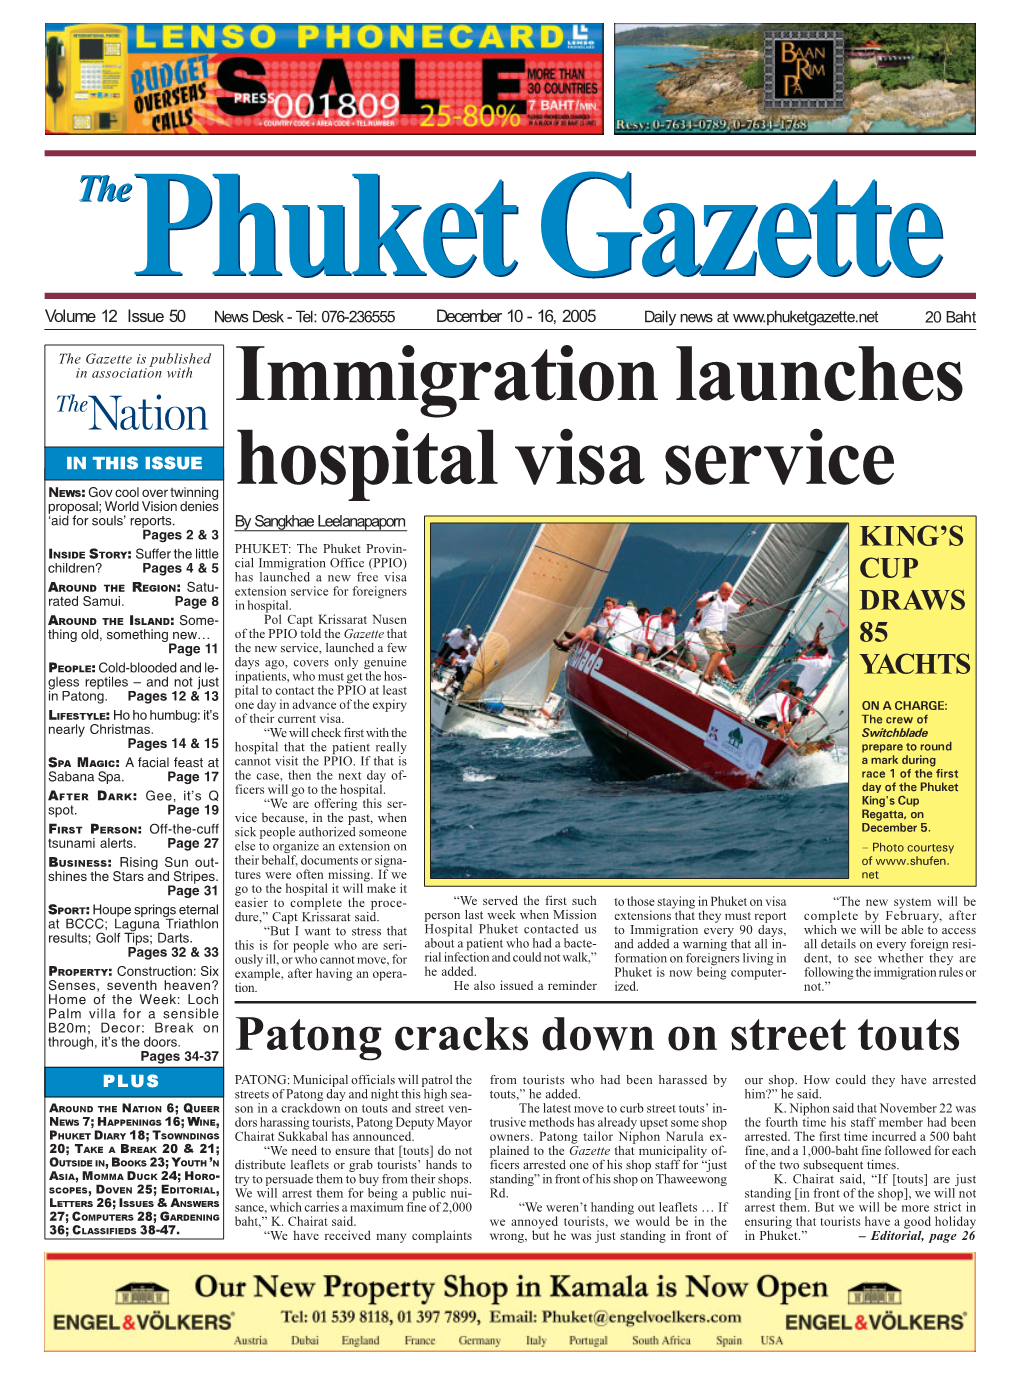 Immigration Launches Hospital Visa Service